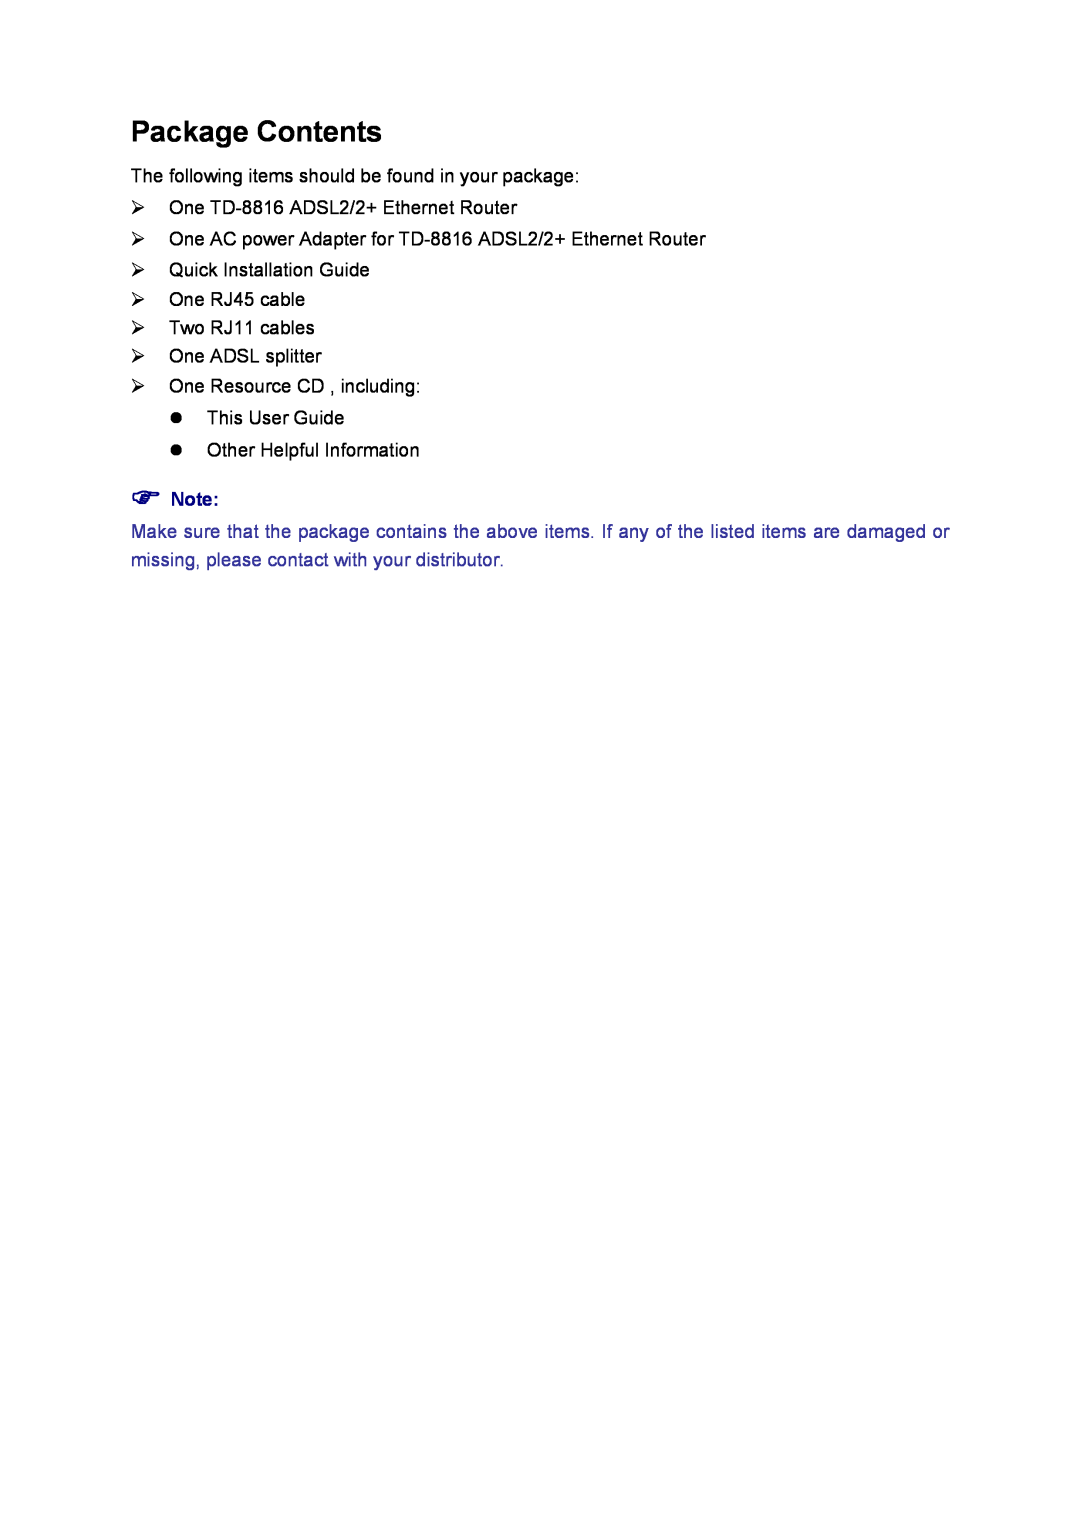 TP-Link TD-8816 manual Package Contents 